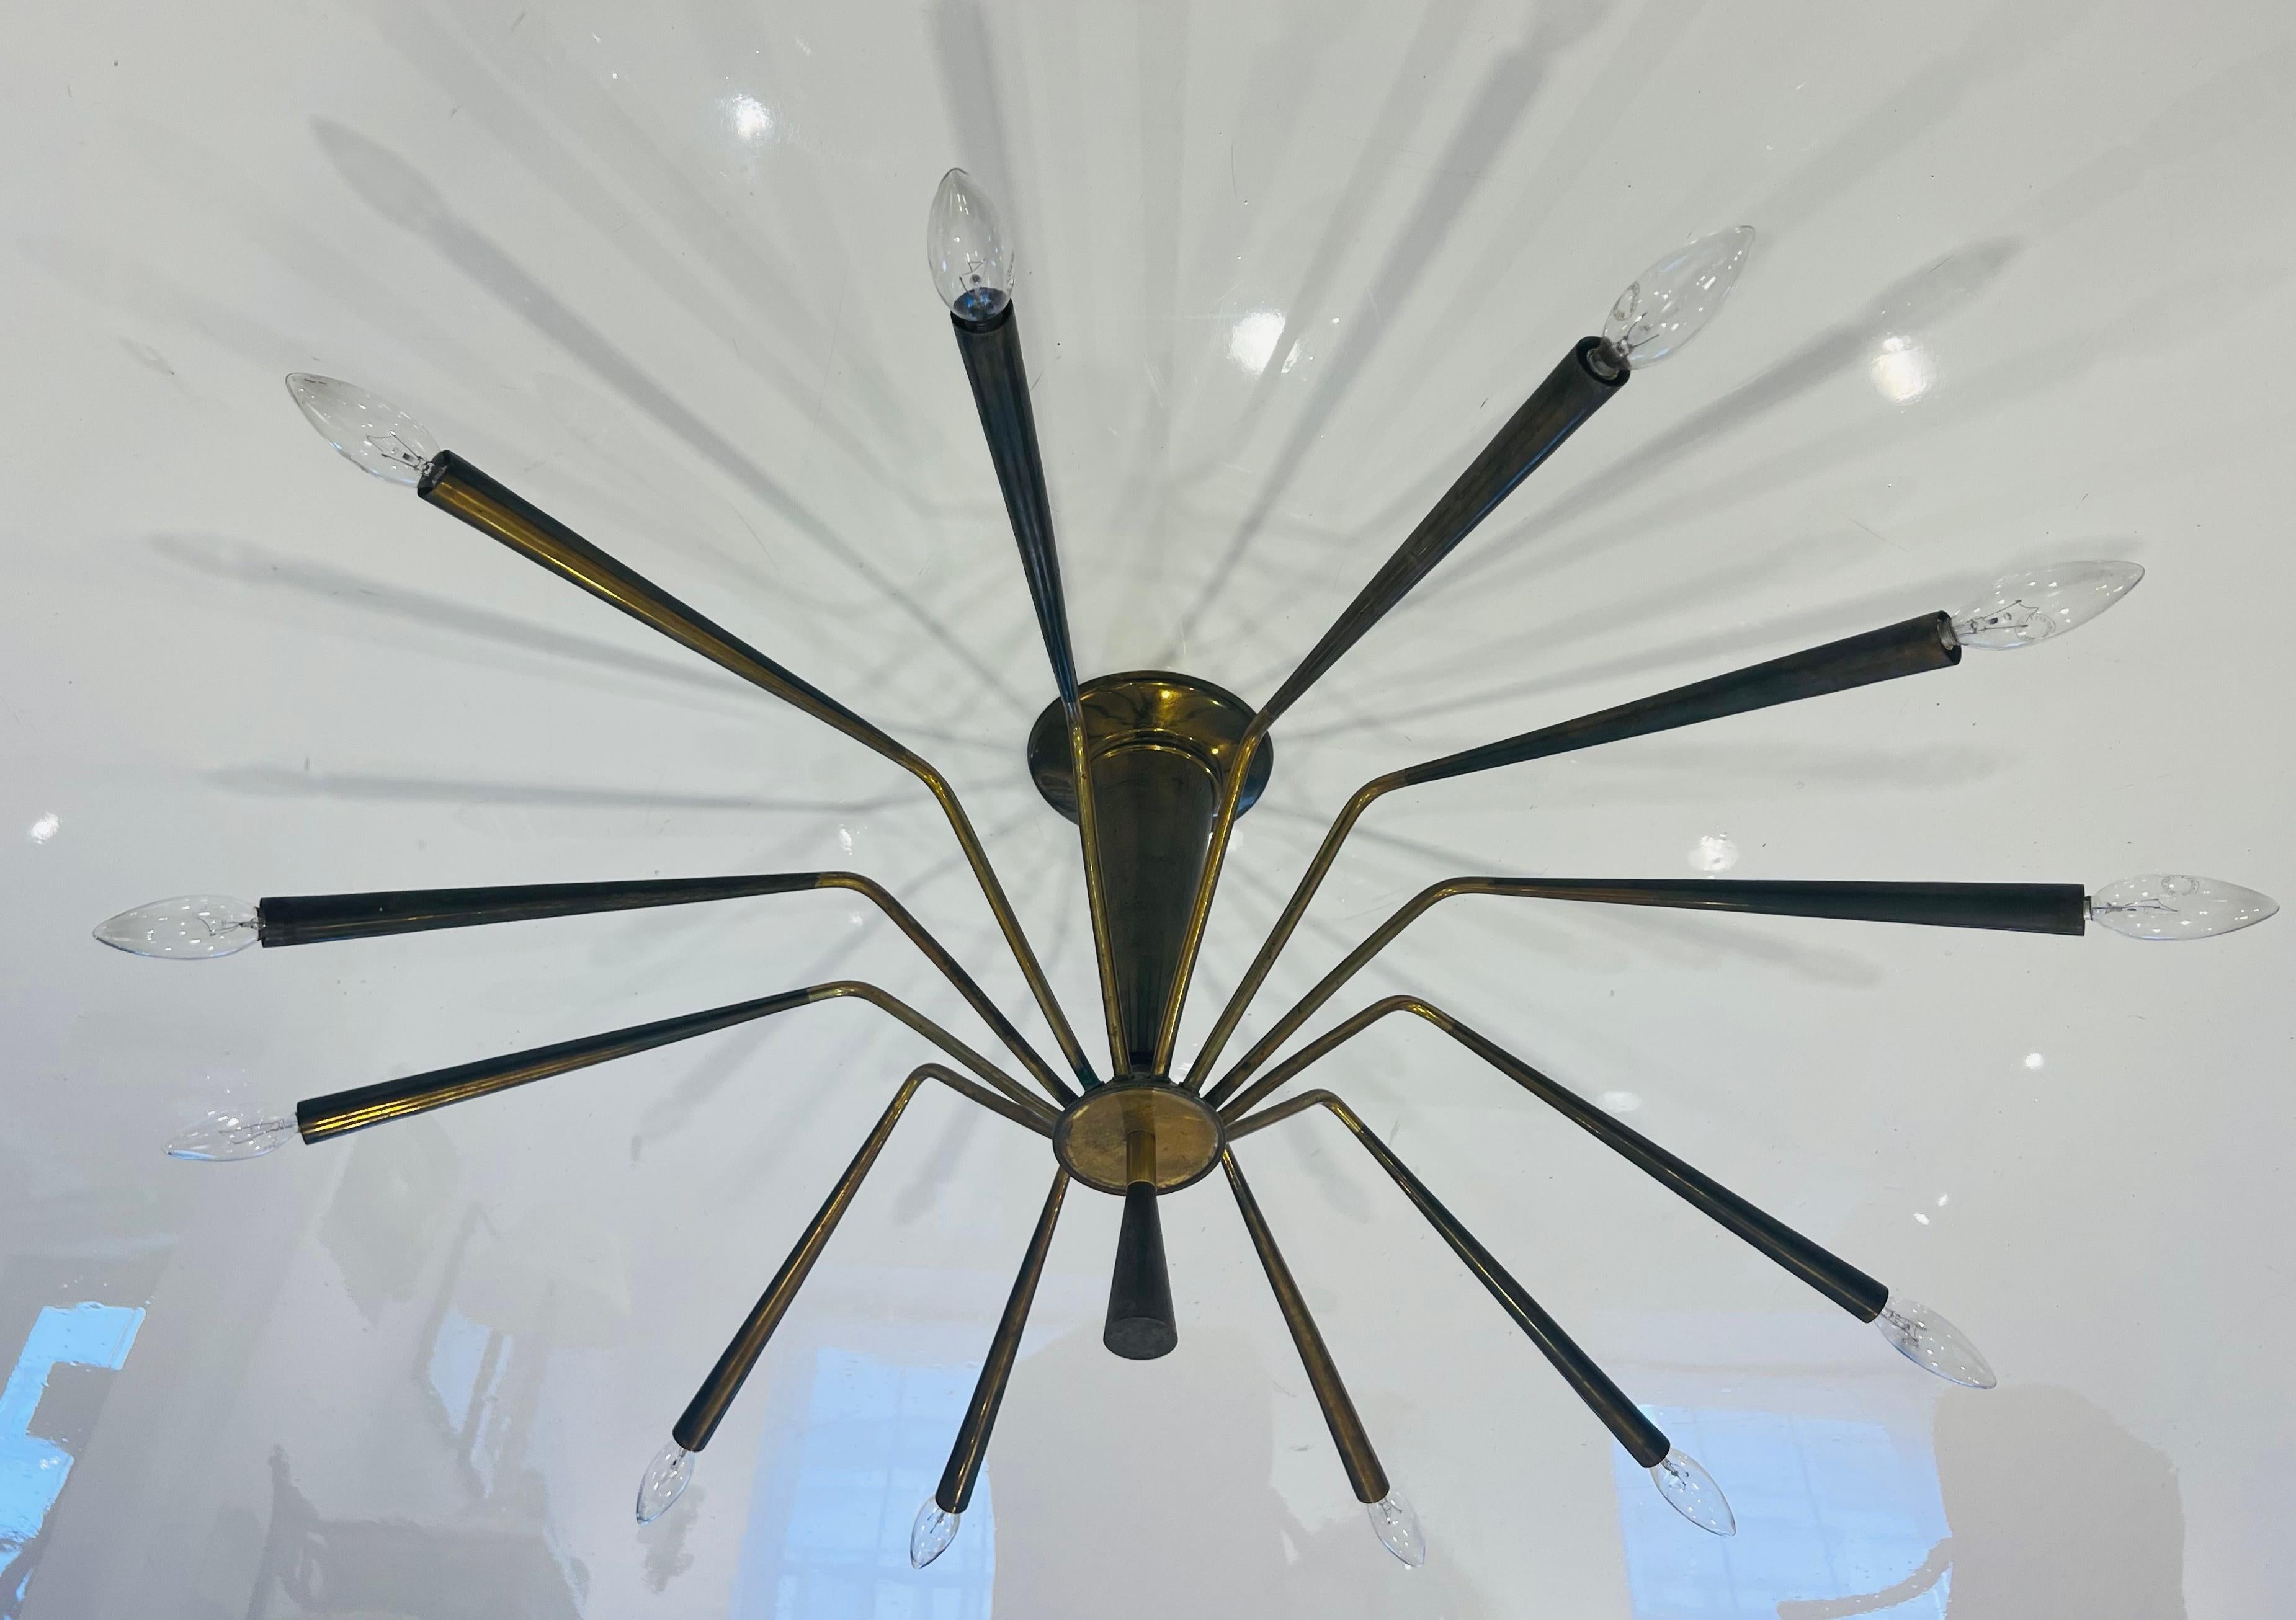 A large 1960s aged brass spider chandelier with 12 sockets designed by Oscar Torlasco for Lumi. 1960. Rewired.